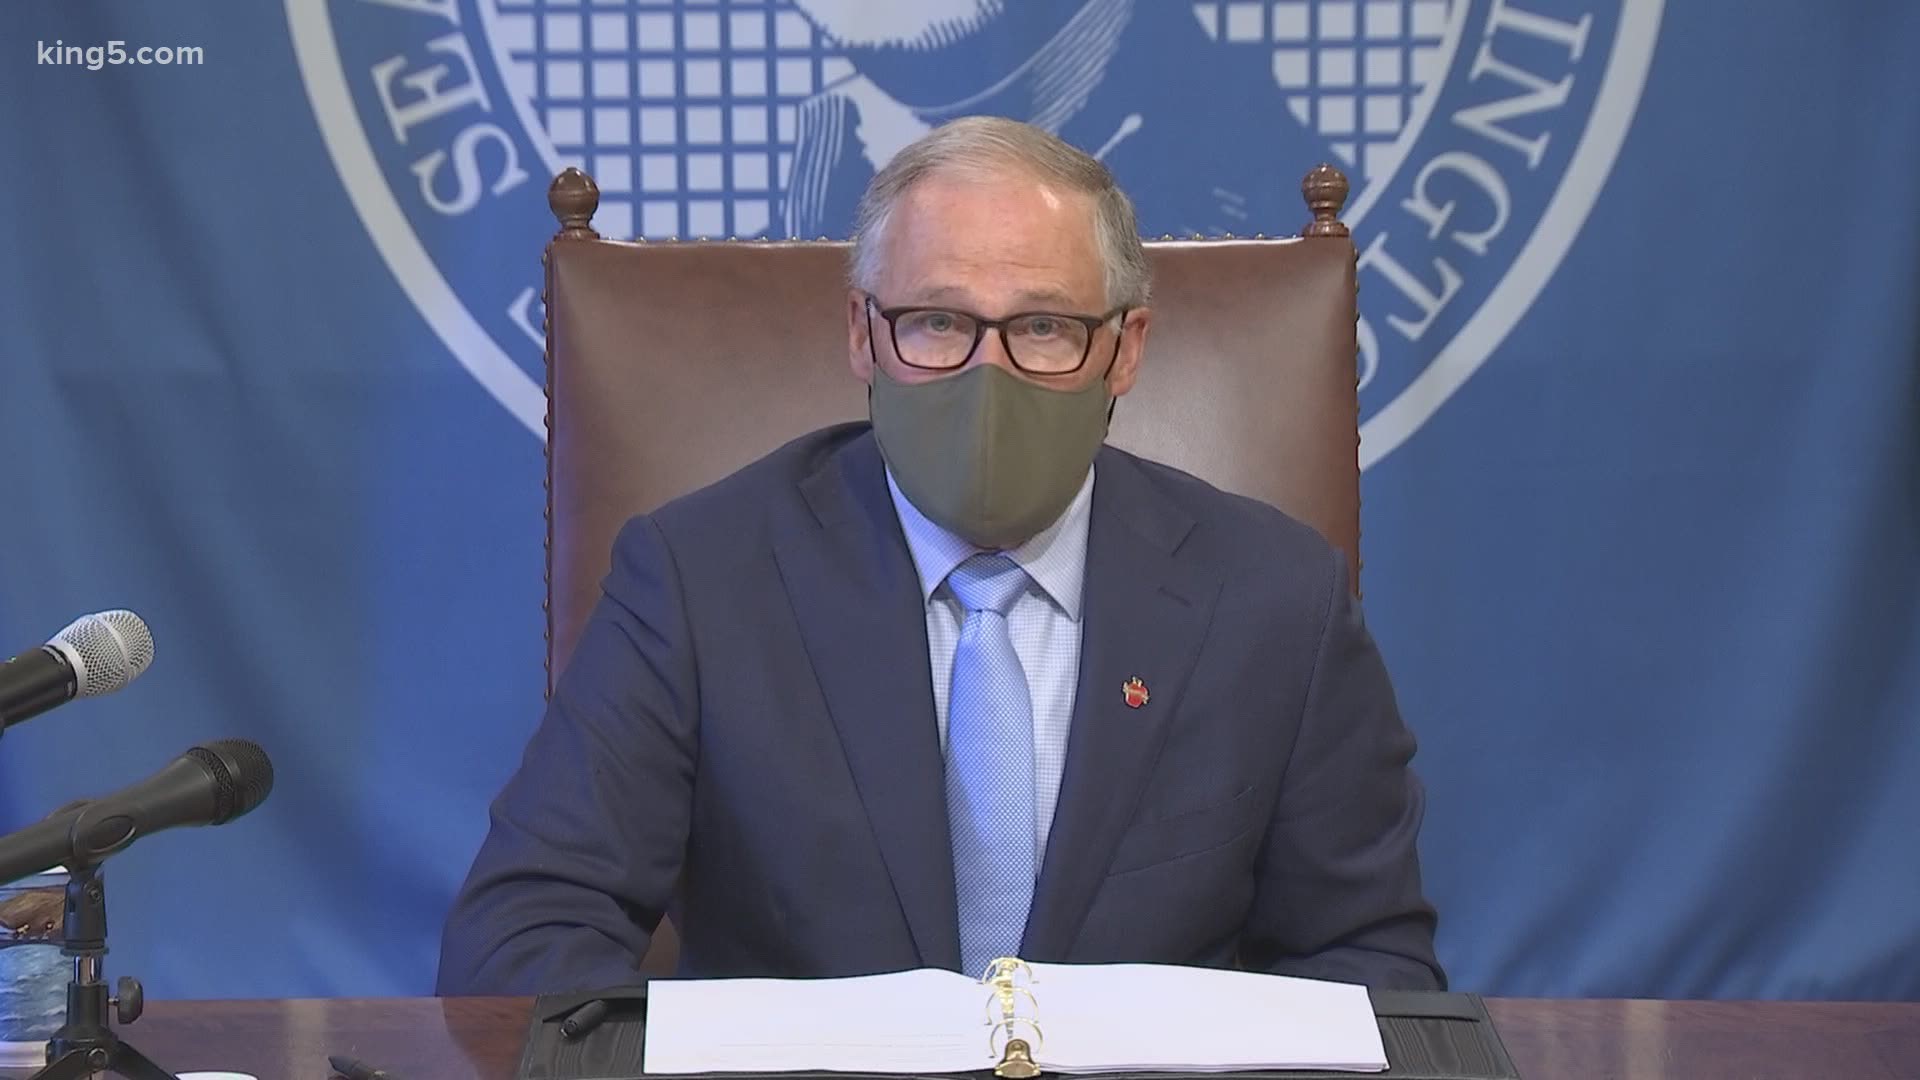 Calling it a “tremendous” step forward, Gov. Jay Inslee said more Washingtonians are wearing masks when they visit businesses in the state.